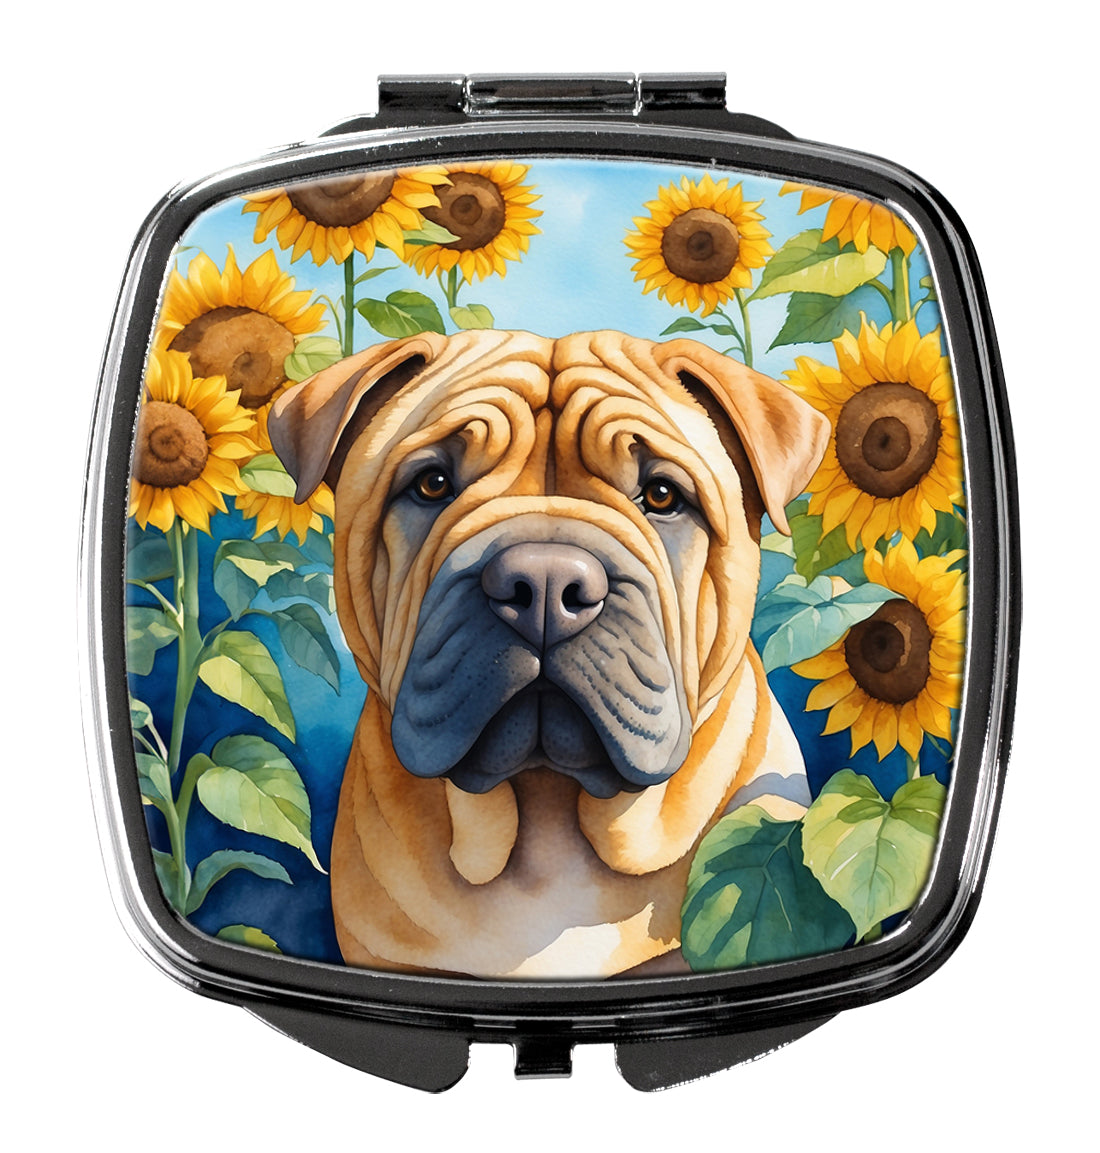 Buy this Shar Pei in Sunflowers Compact Mirror